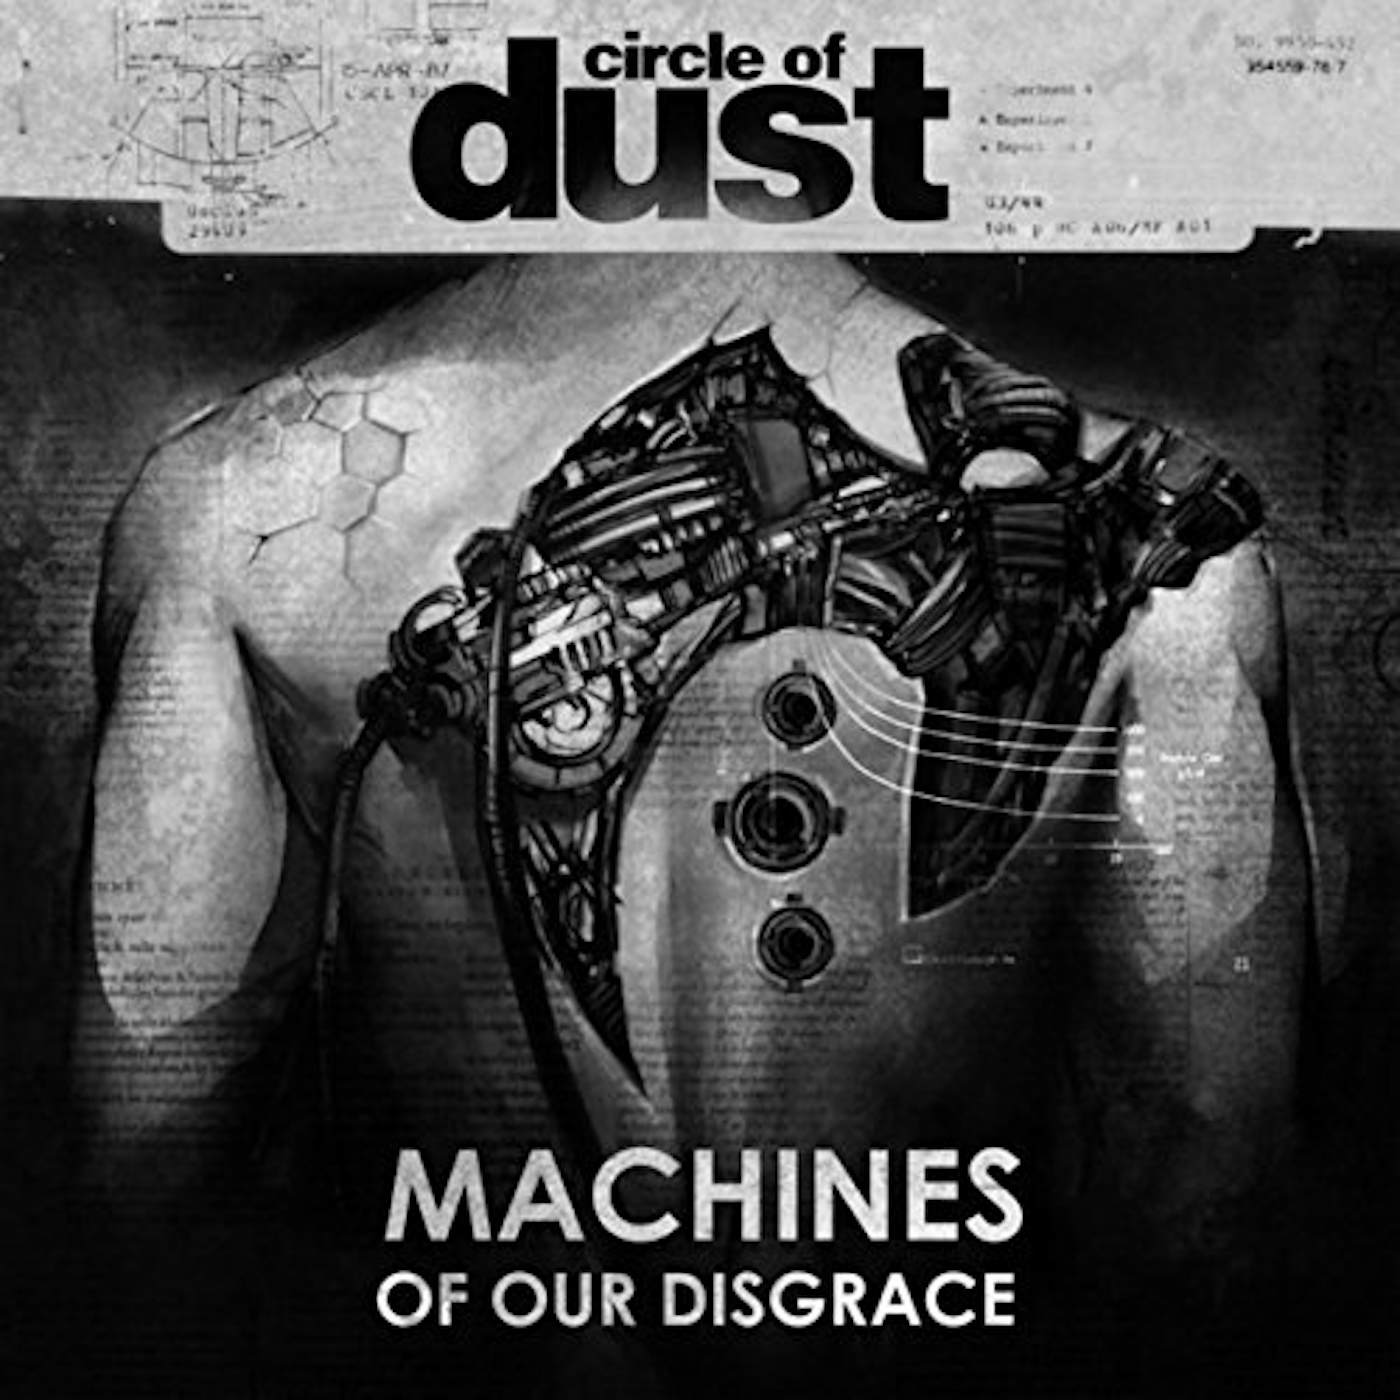 Circle of Dust MACHINES OF OUR DISGRACE CD